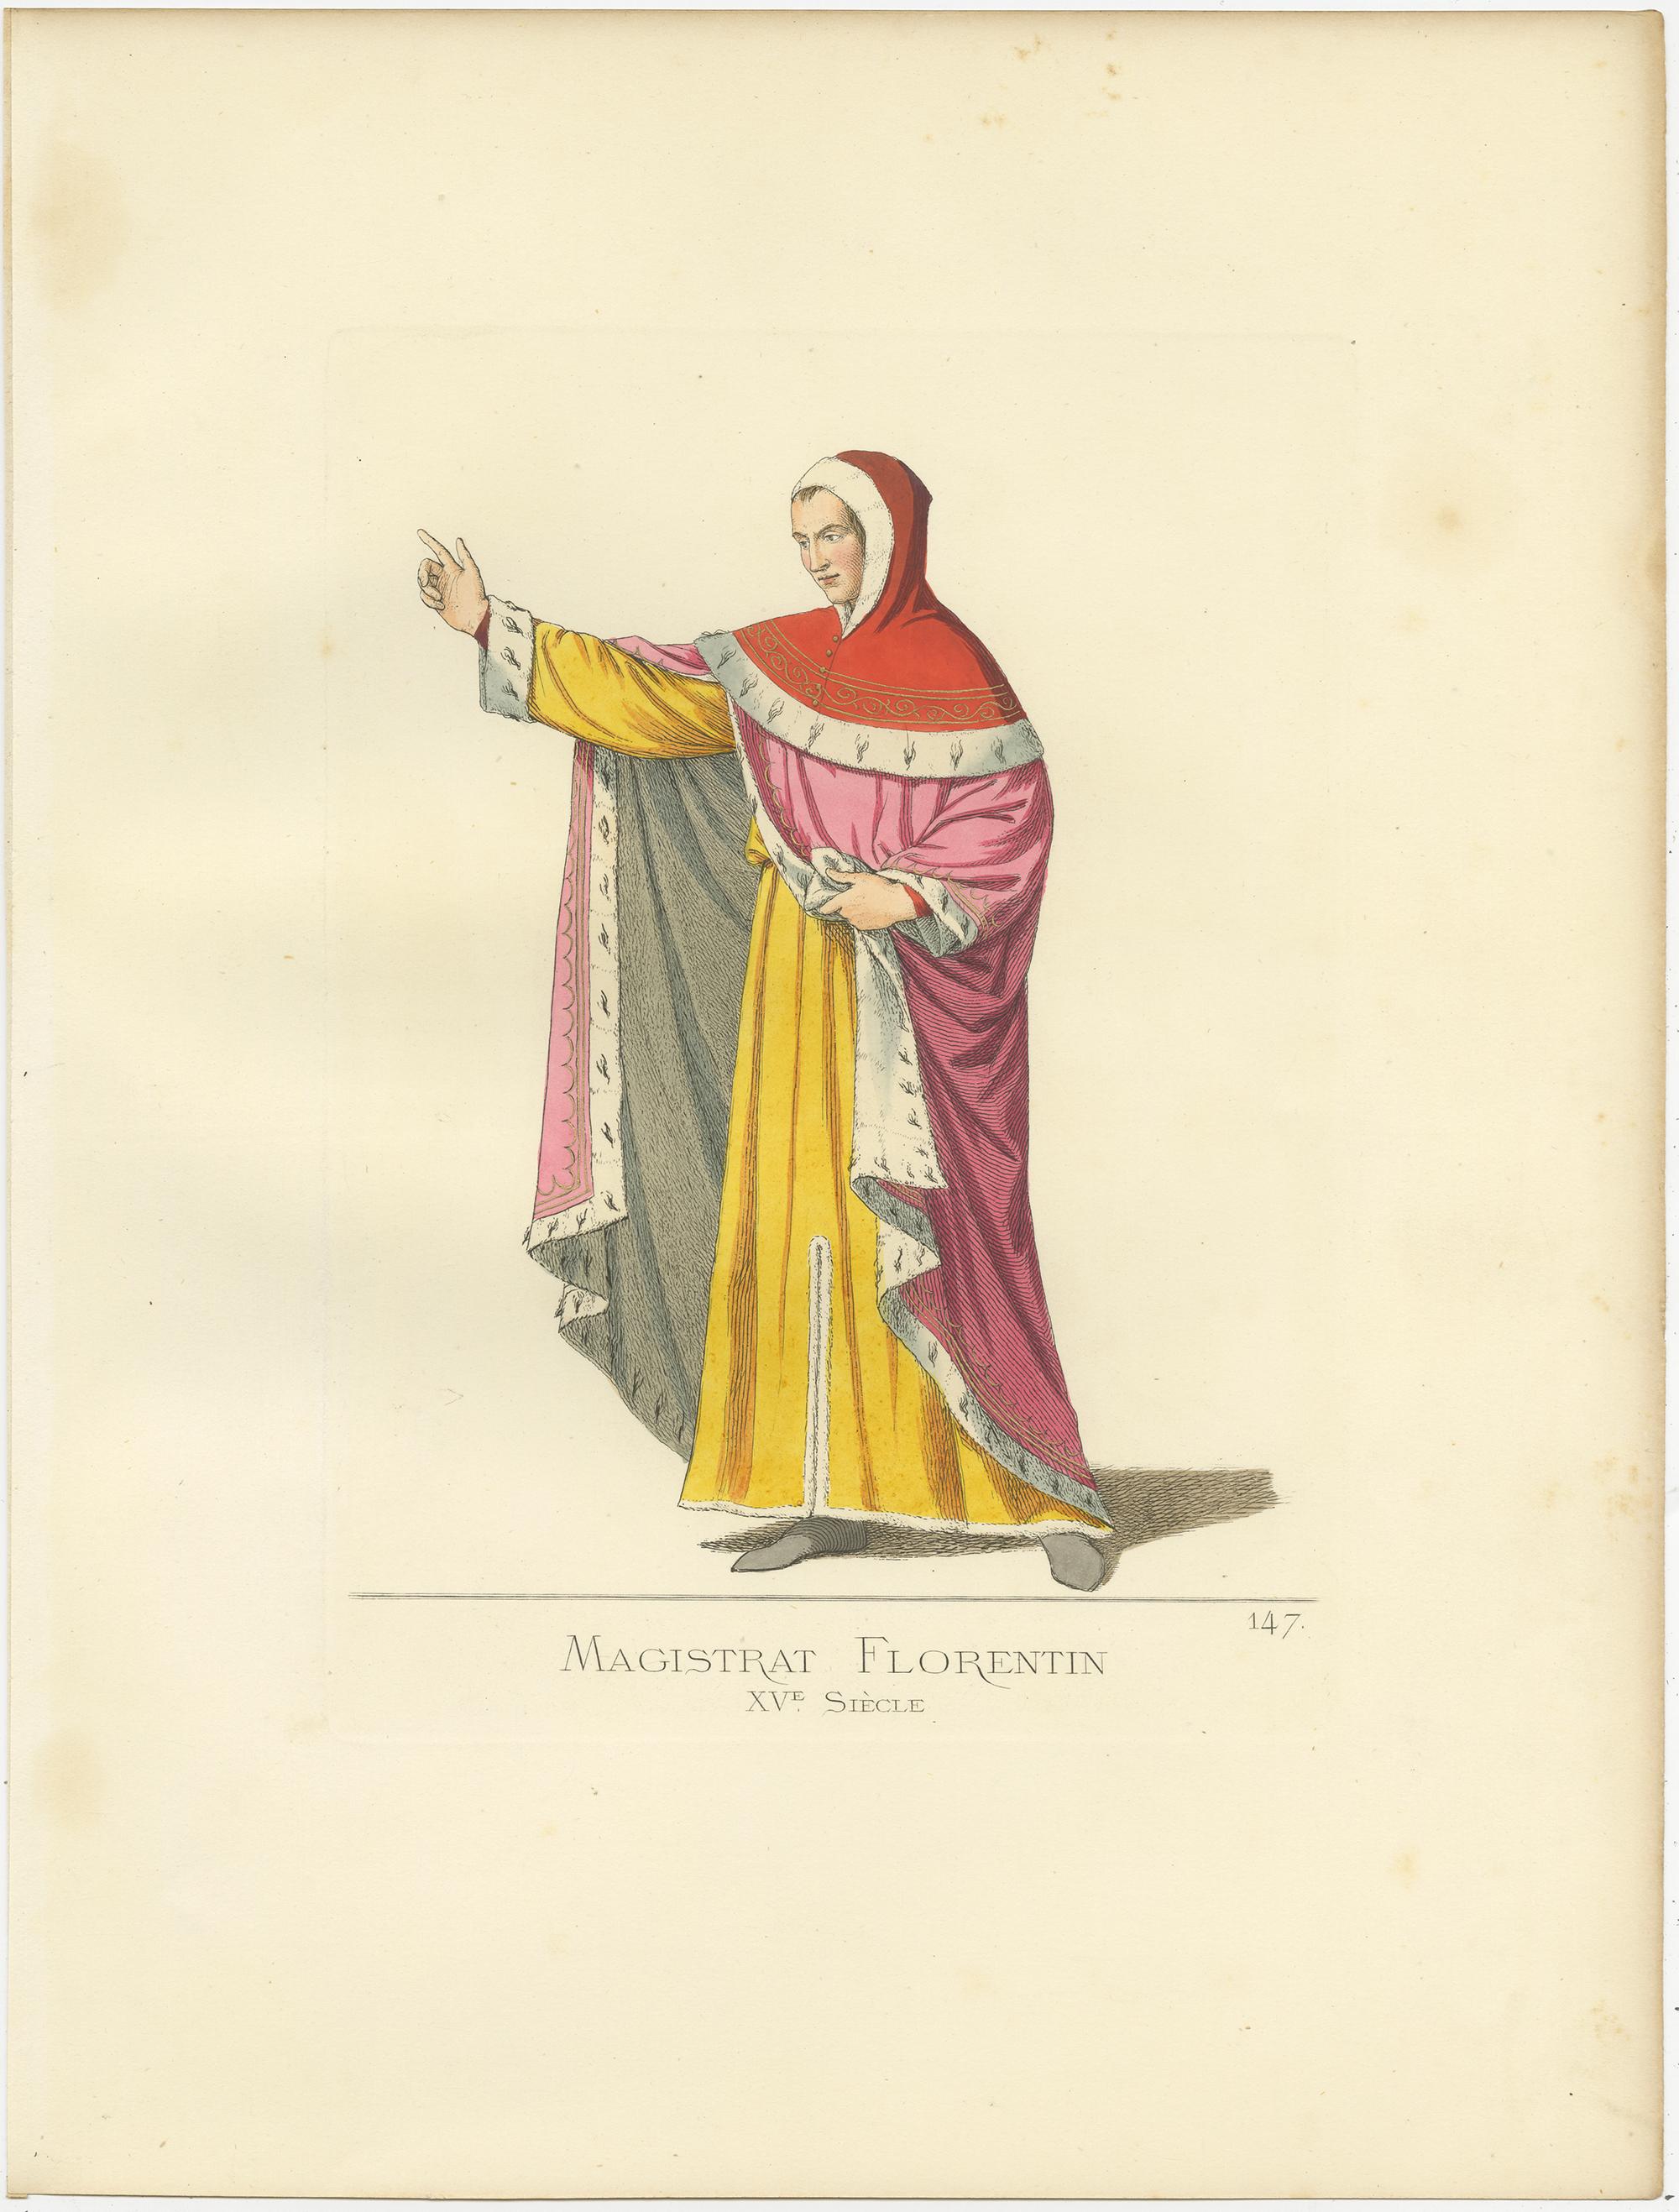 19th Century Antique Print of a Florentine Magistrate, 15th Century, by Bonnard, 1860 For Sale